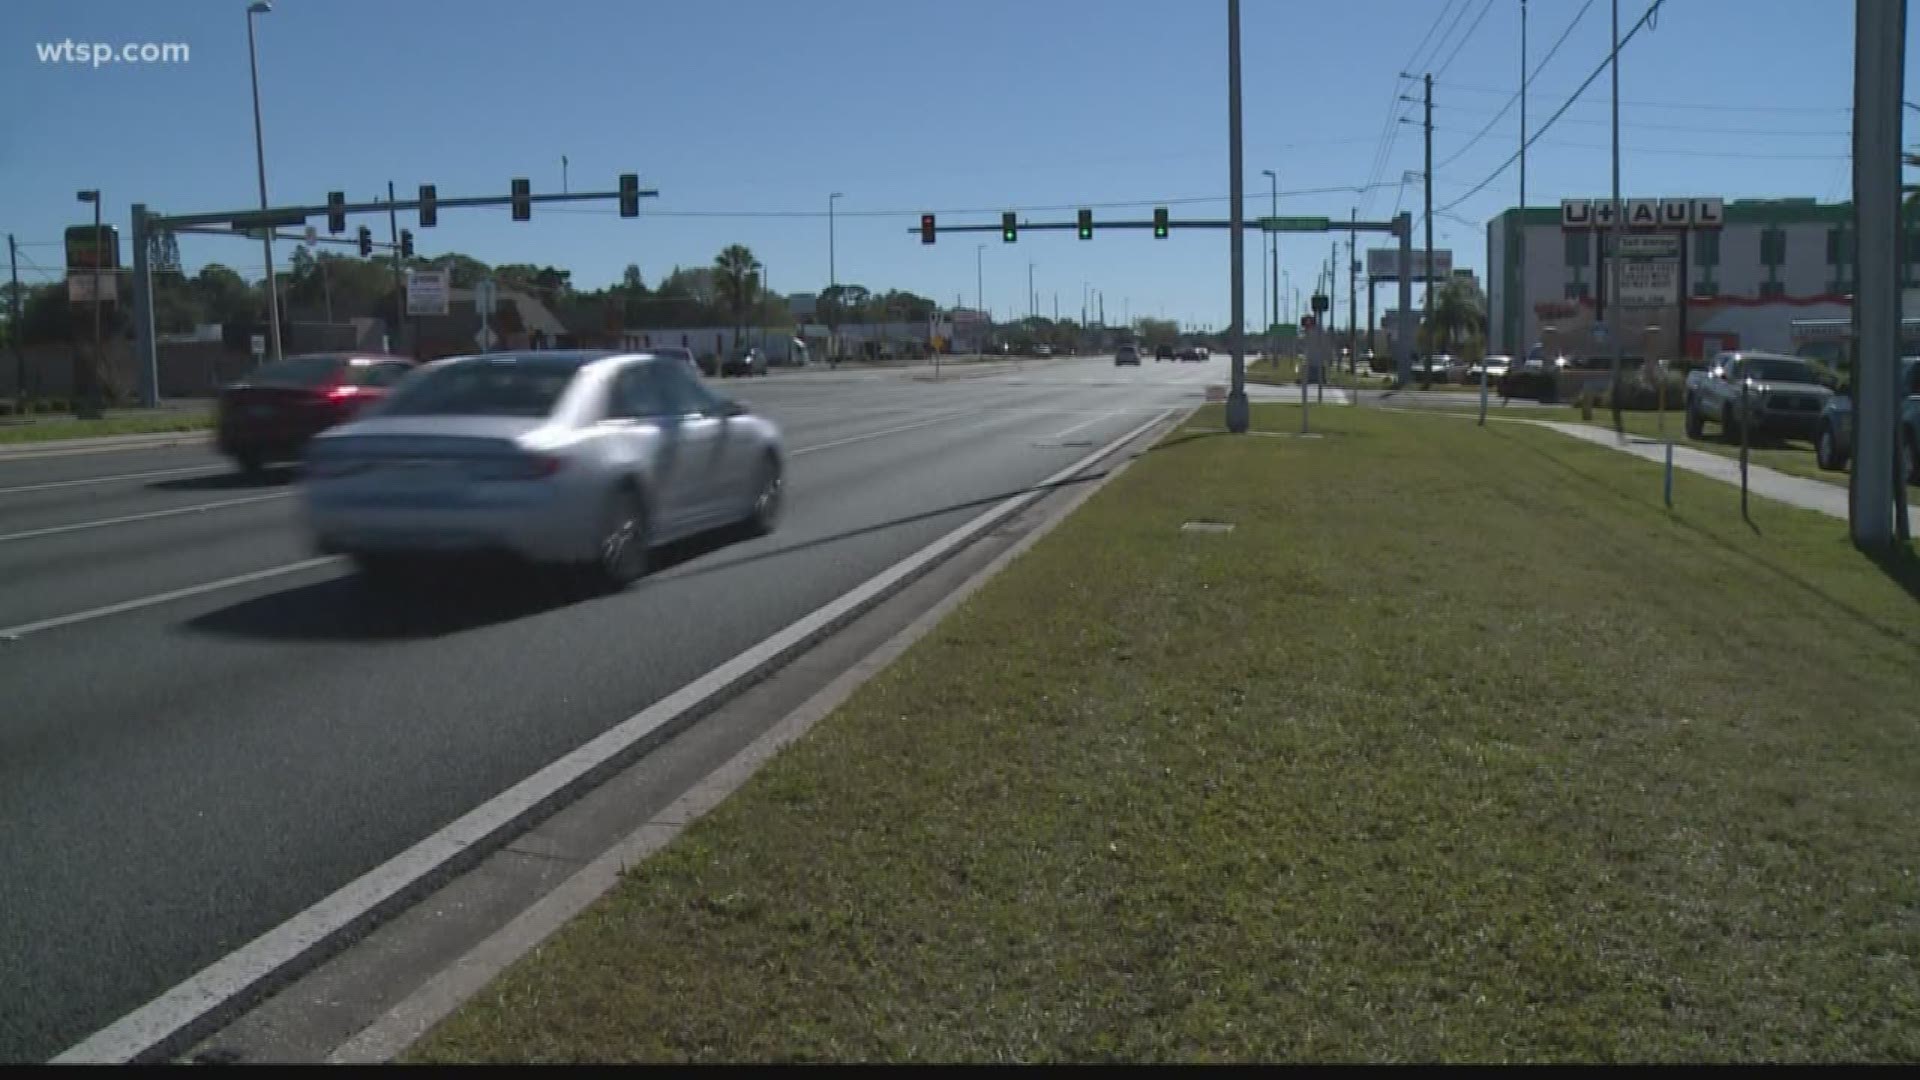 A man is being treated at the hospital after being shot in the abdomen during a road rage incident Sunday morning on US 19, according to New Port Richey police.